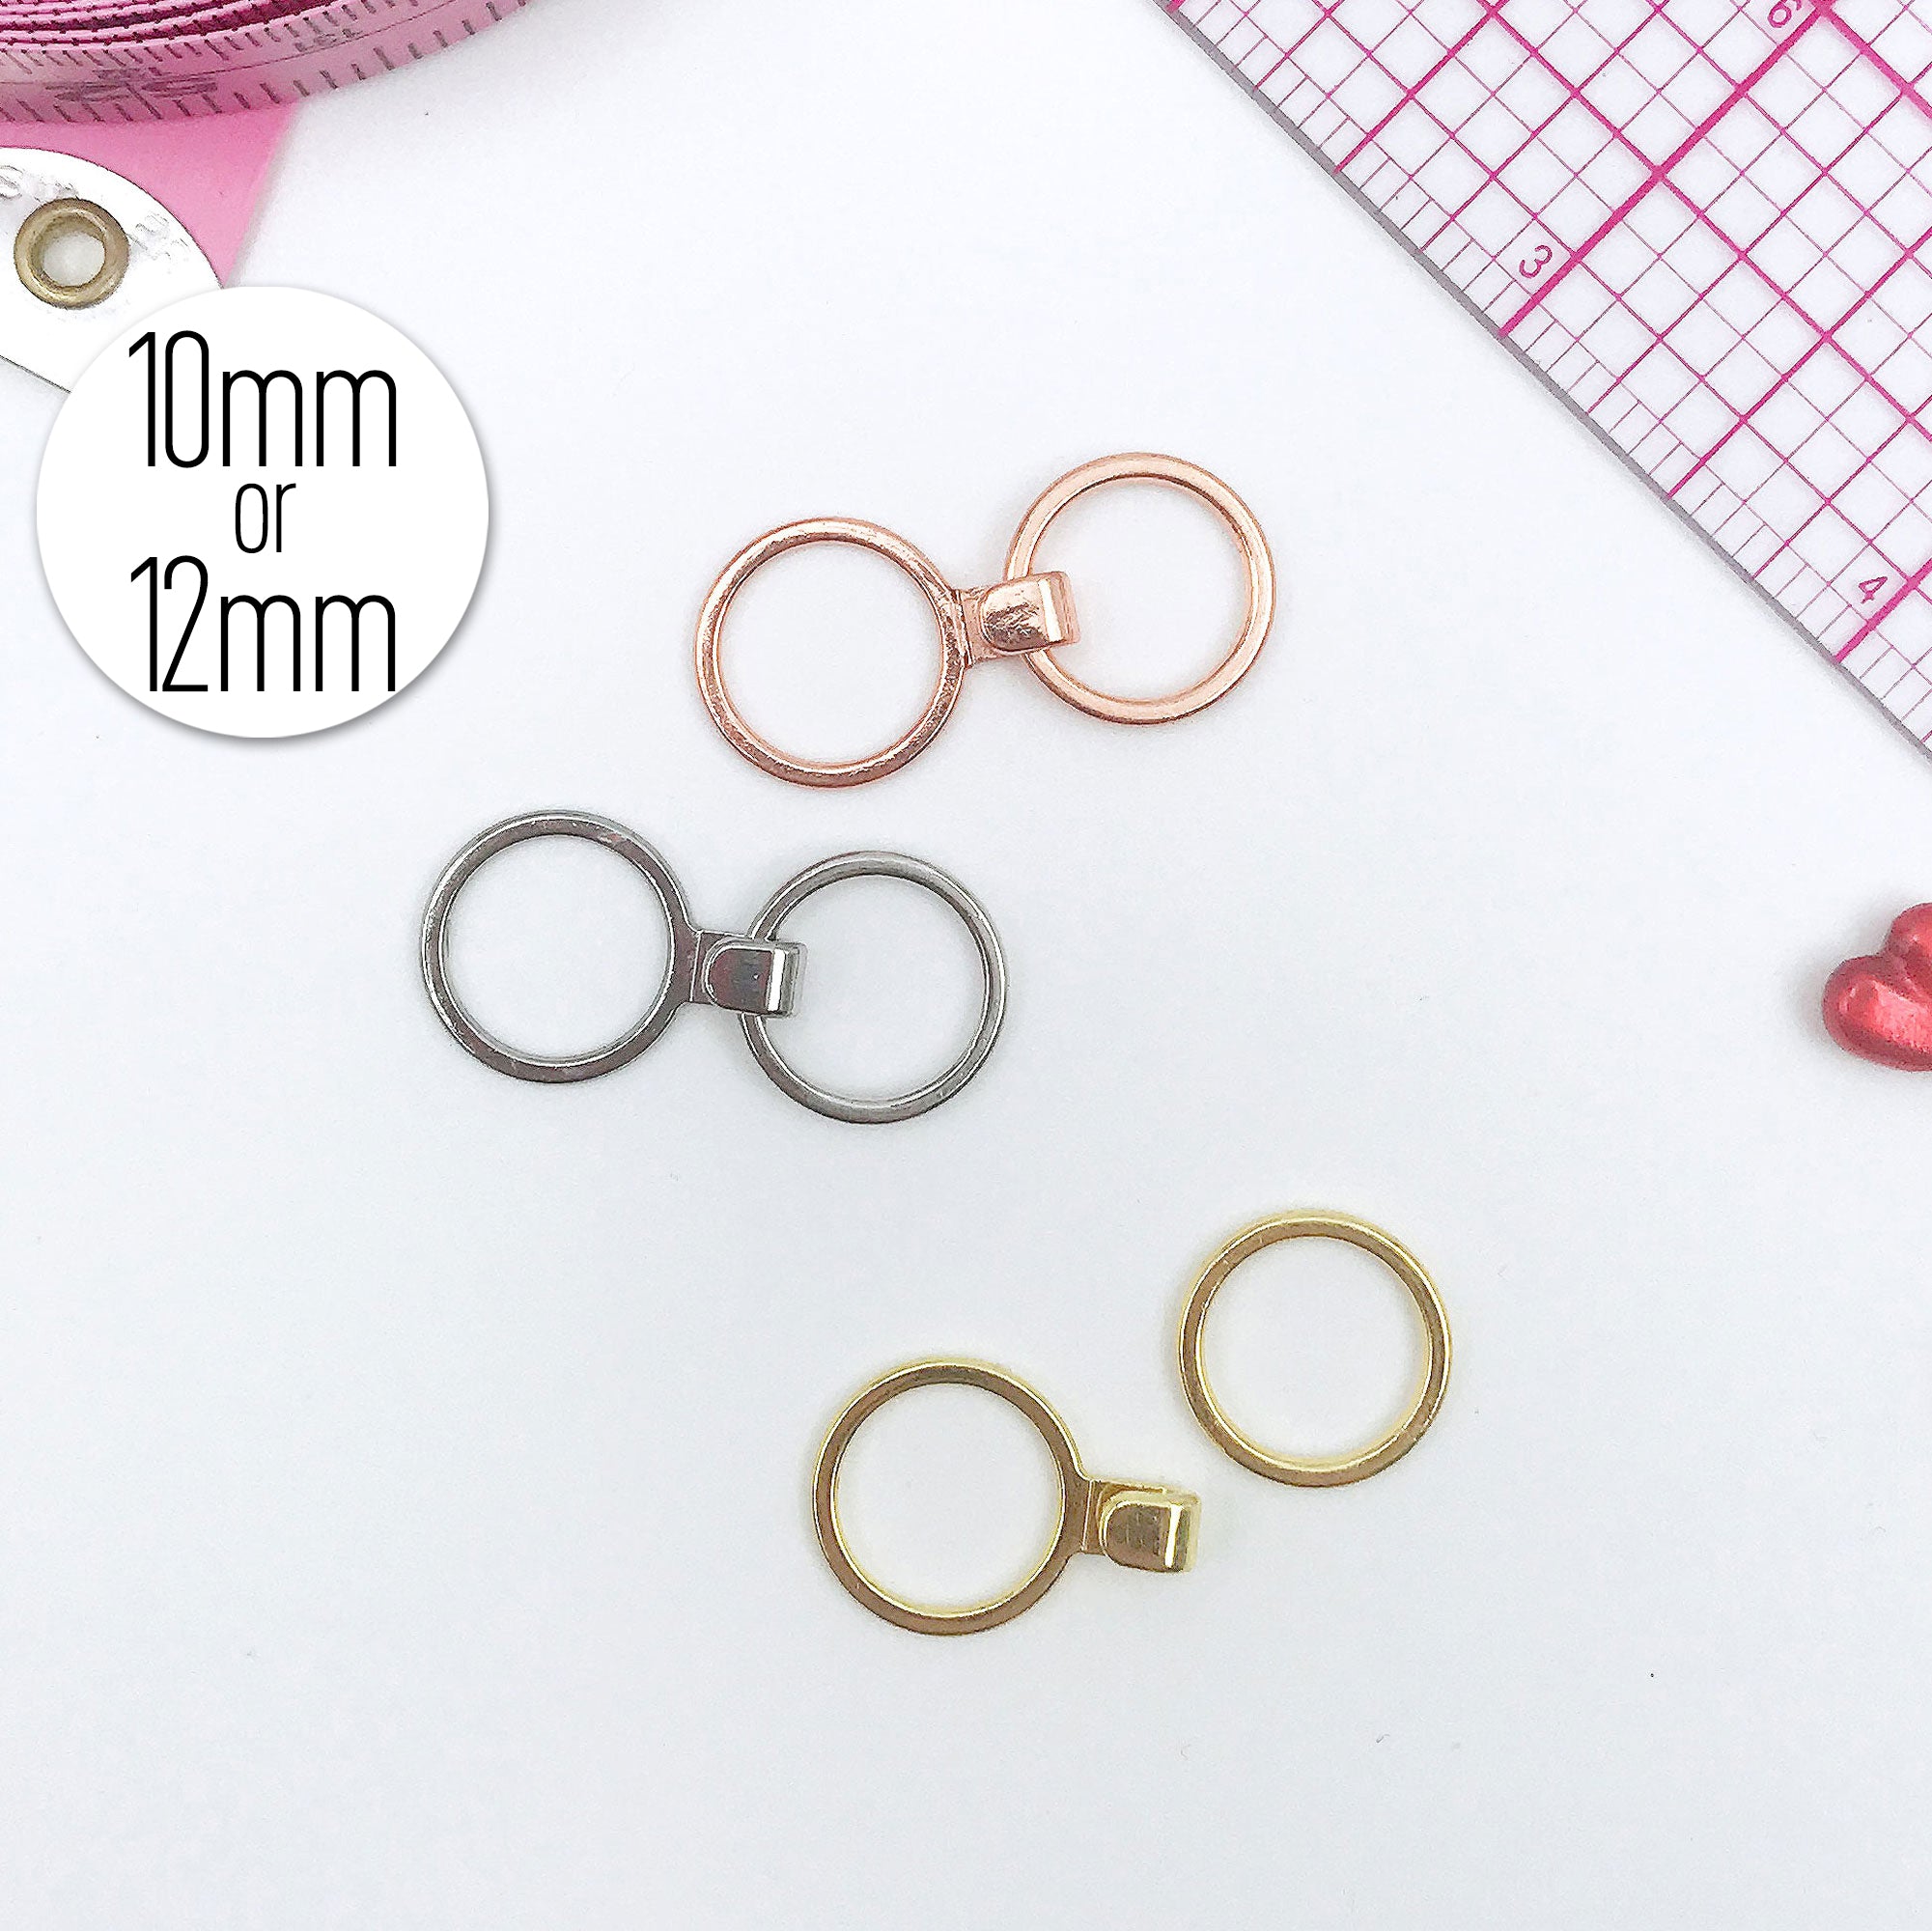 1/2 (12mm) or 3/8 (10mm) J-Hook with ring Set, Converts Bra into a R